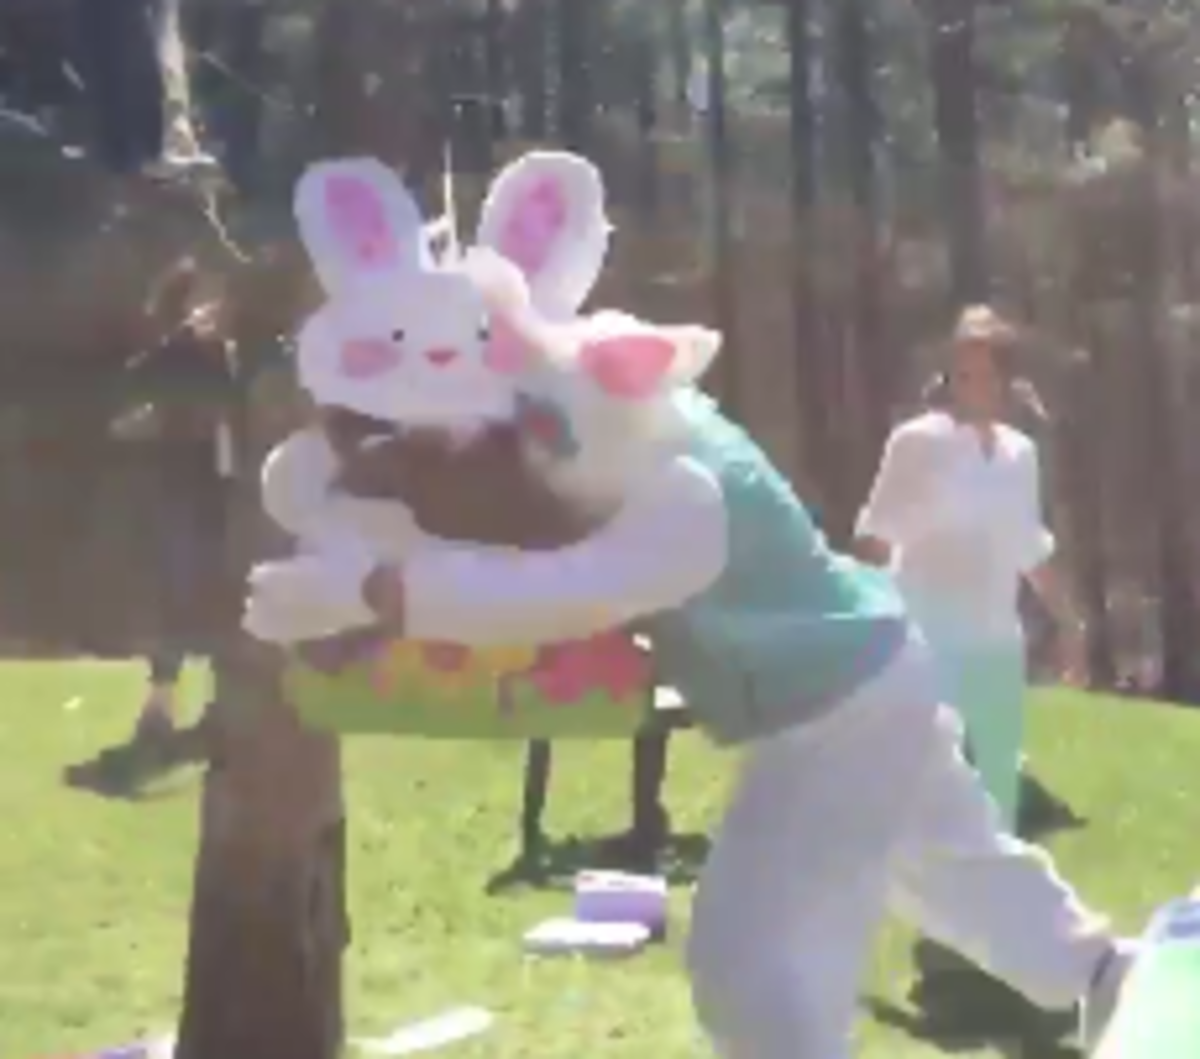 James Franklin wears a bunny costume while tackling a piñata.